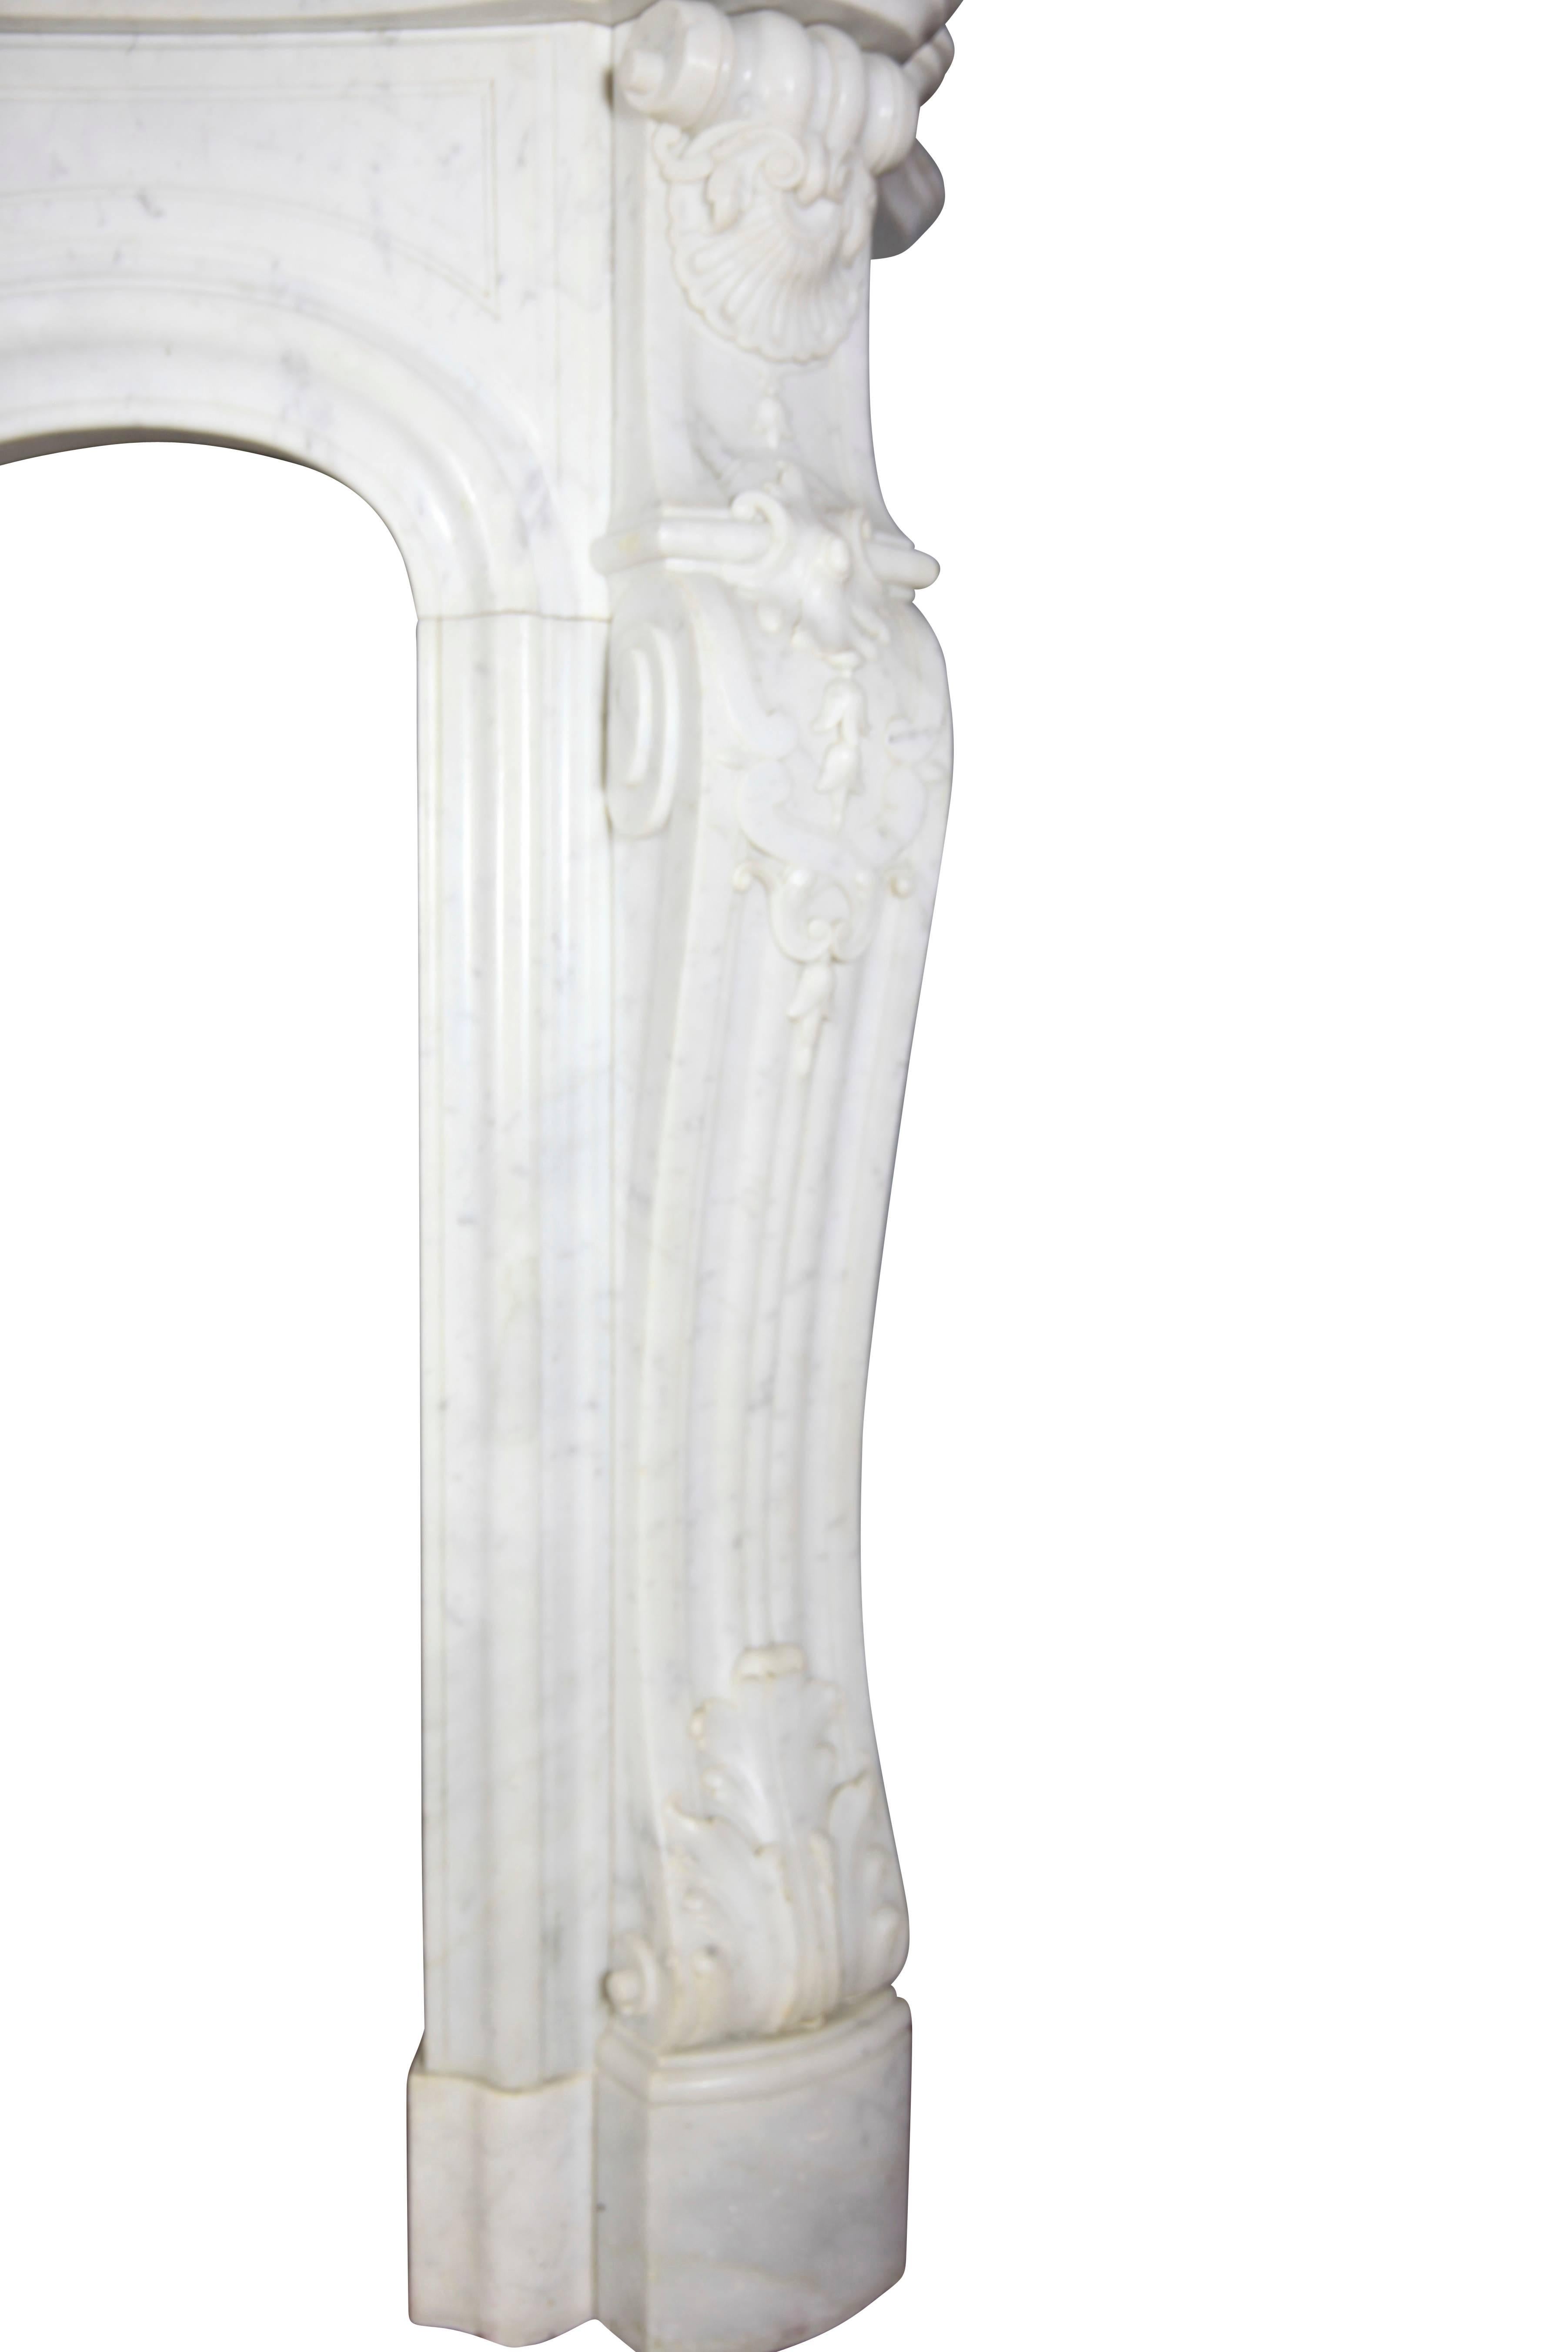 French Grand Interior Antique Fireplace Surround in Carrara White Marble For Sale 4